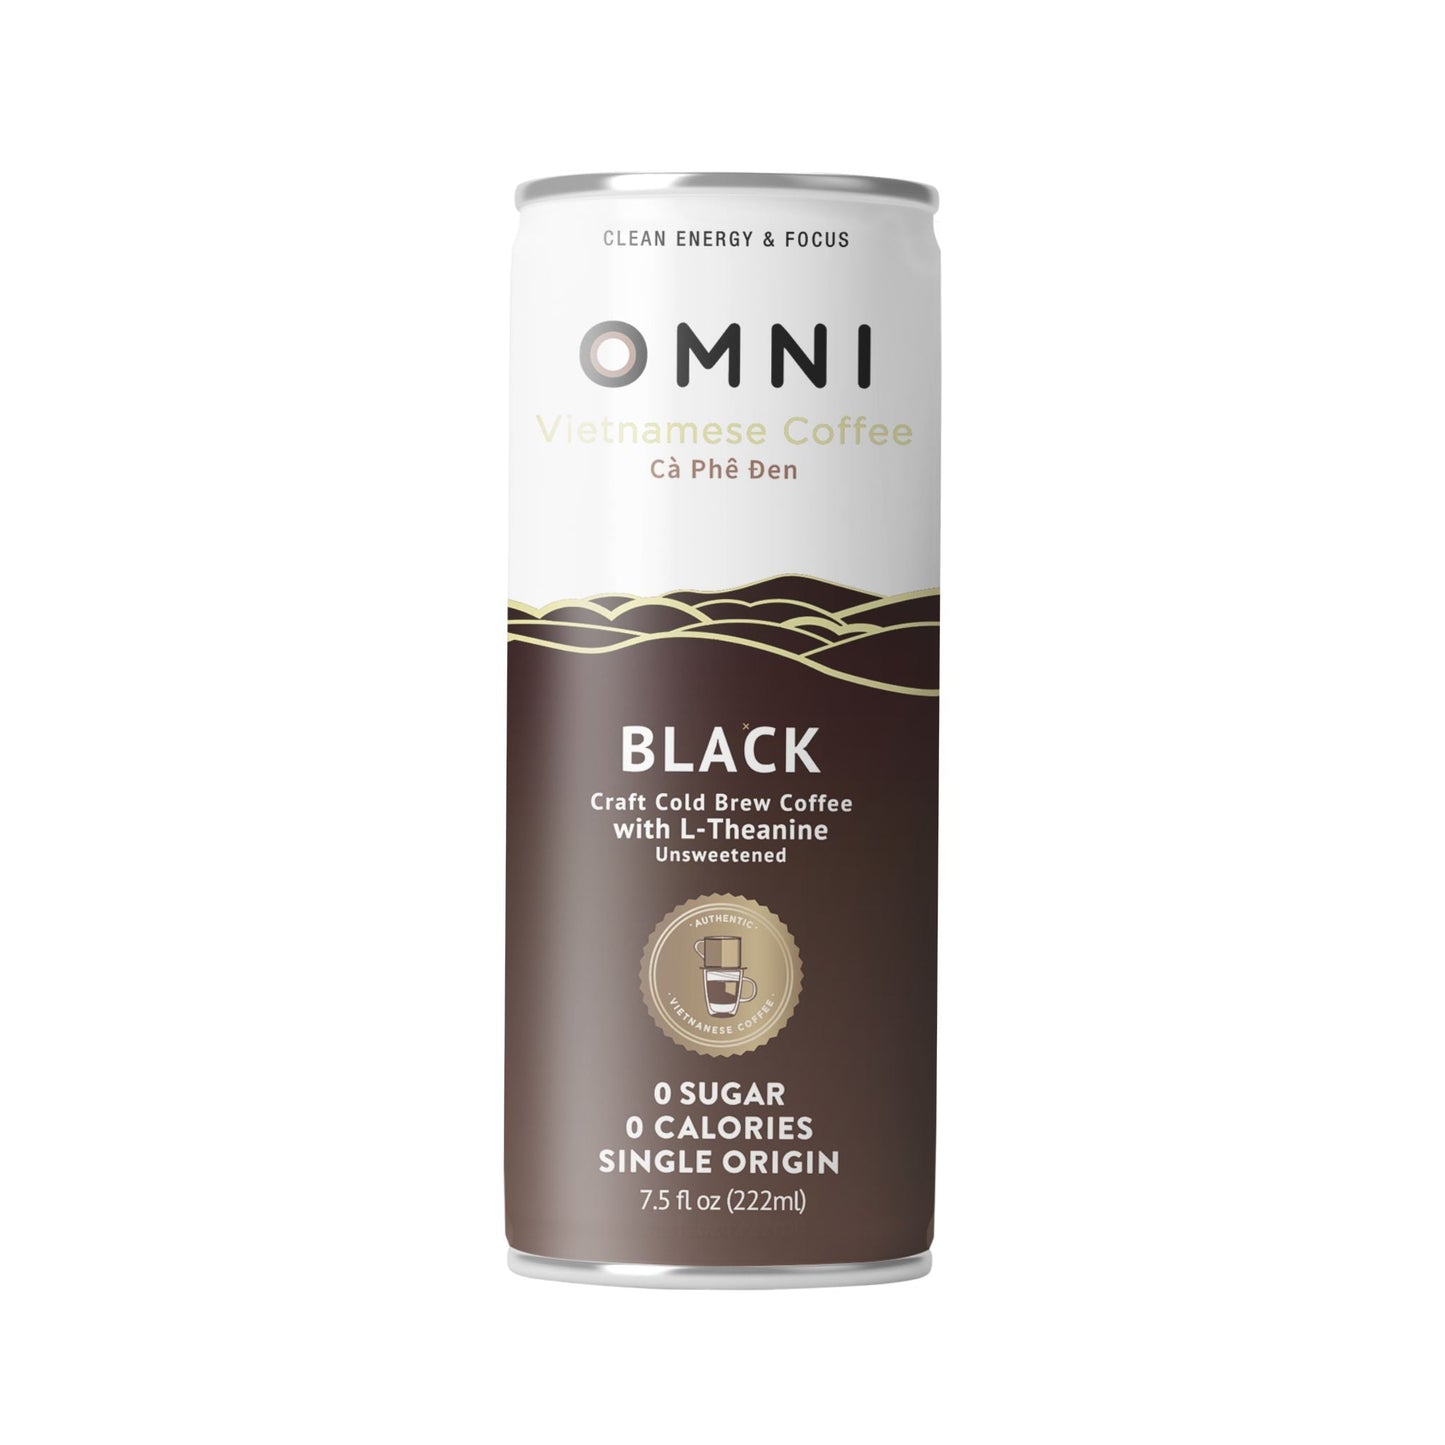 Black Vietnamese Cold Brew Coffee with L-Theanine Pack of 12 - Omni